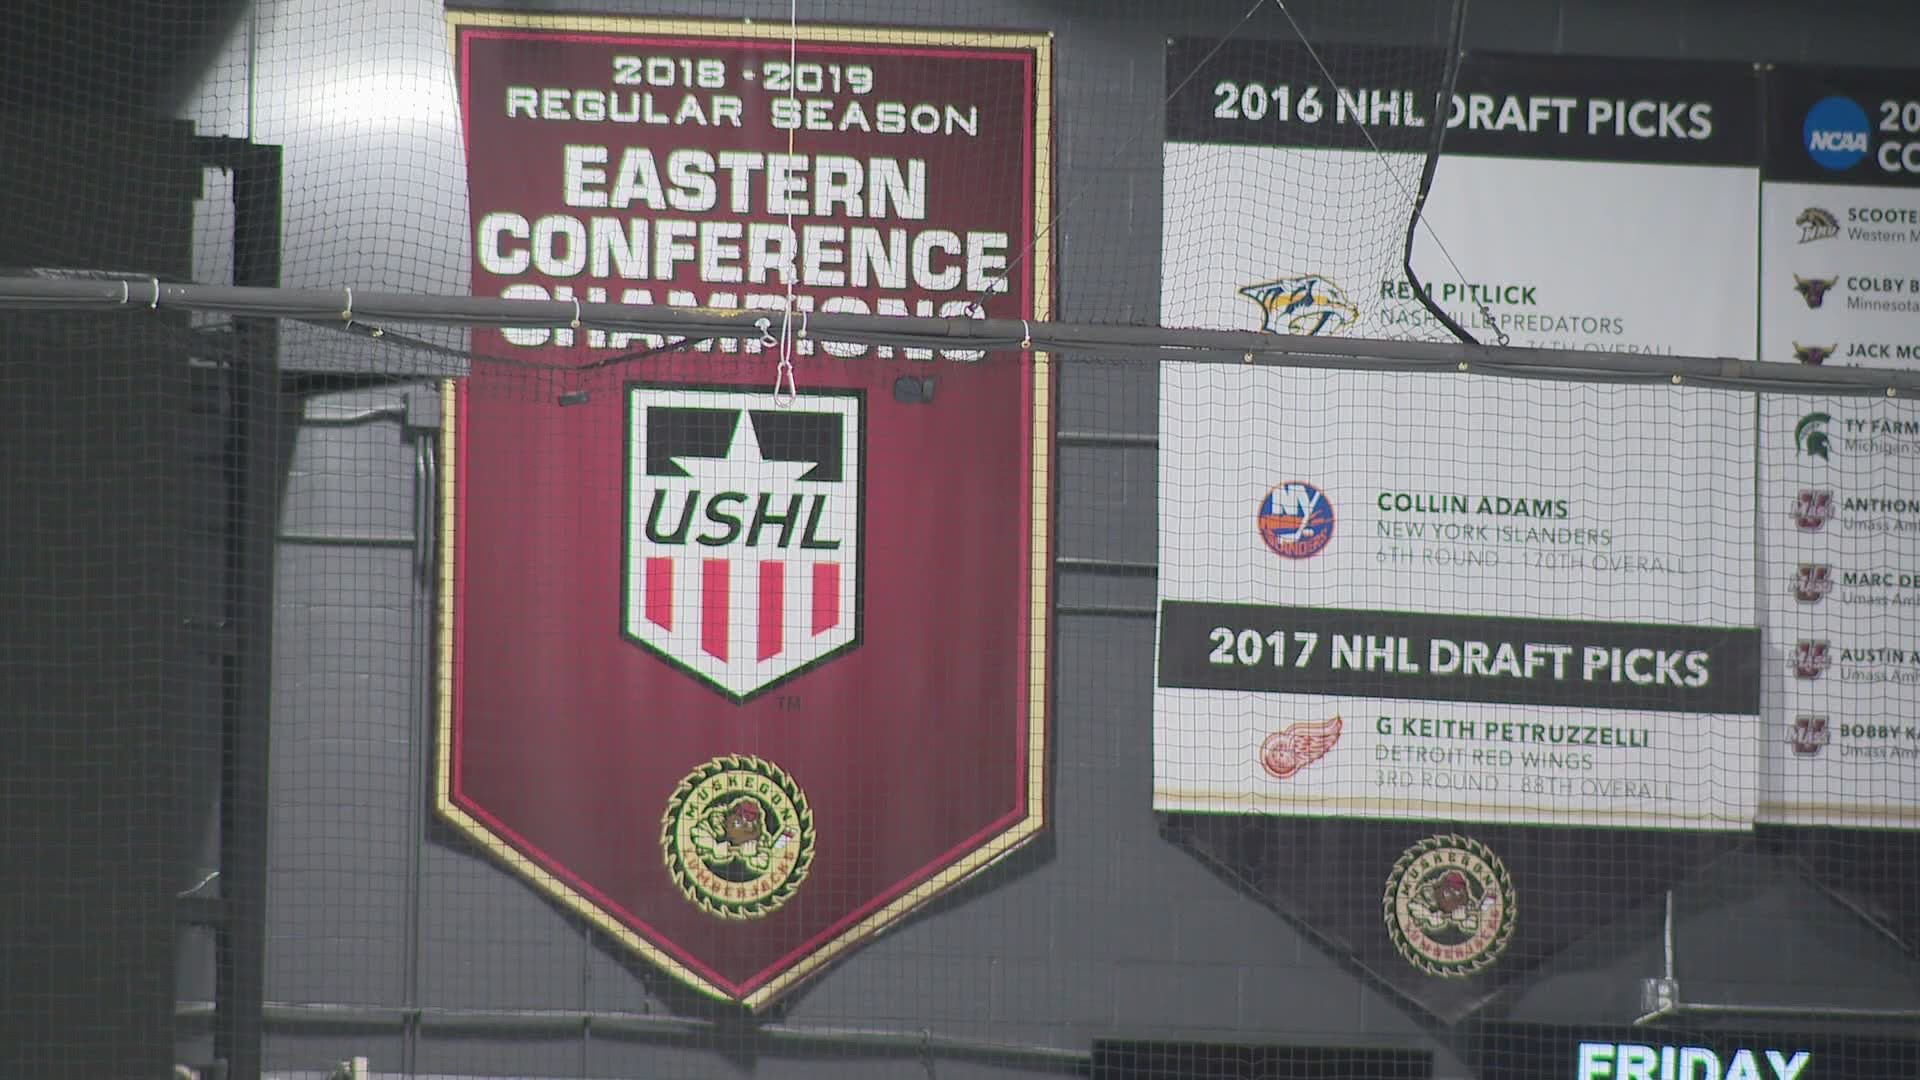 What’s unknown at this time is when the season will begin for USHL teams including the Muskegon Lumberjacks.